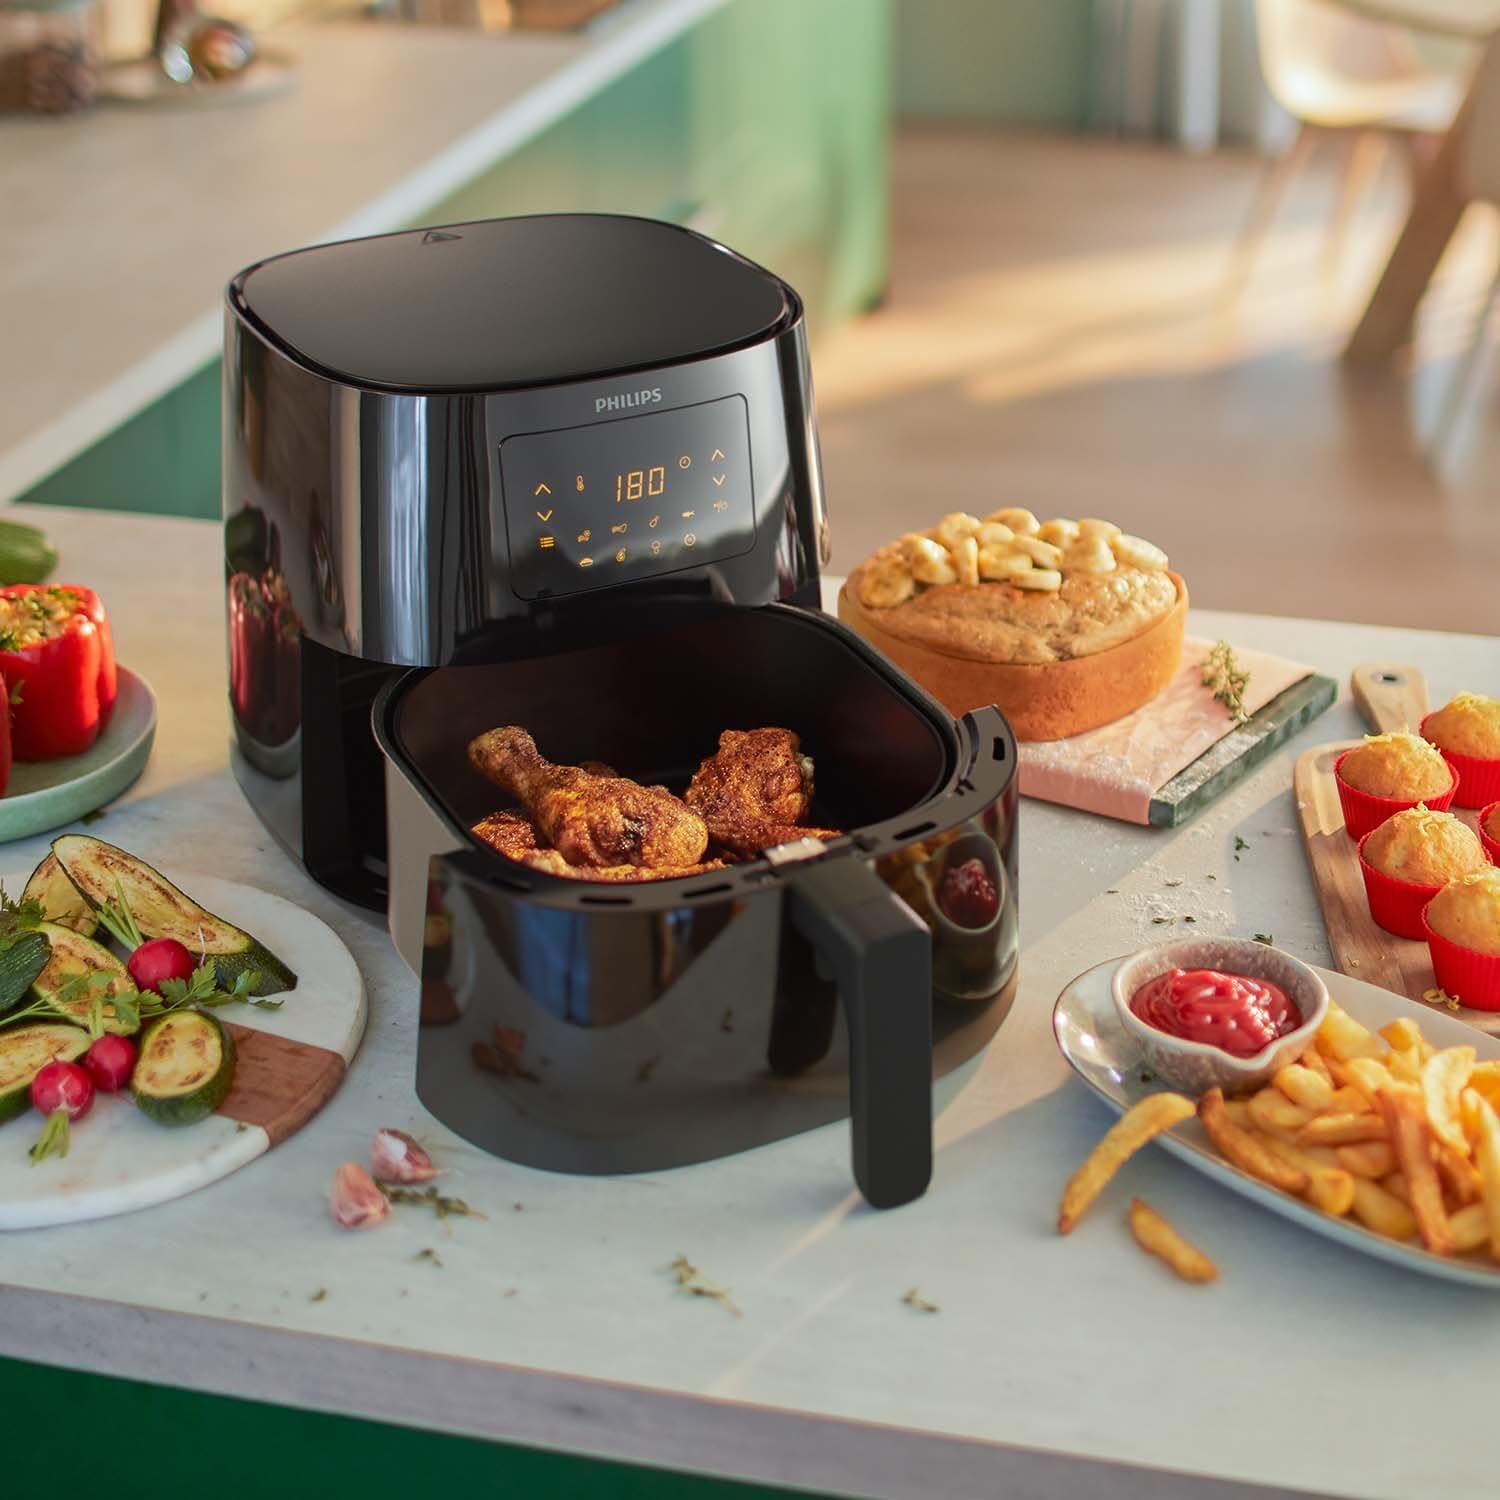 Philips Kitchen Appliances Essential Airfryer XL 2.65lb/6.2L Capacity Digital Airfryer with Rapid Air Technology, Easy Clean Basket, Black - HD9270/91 - Amazing Gadgets Outlet